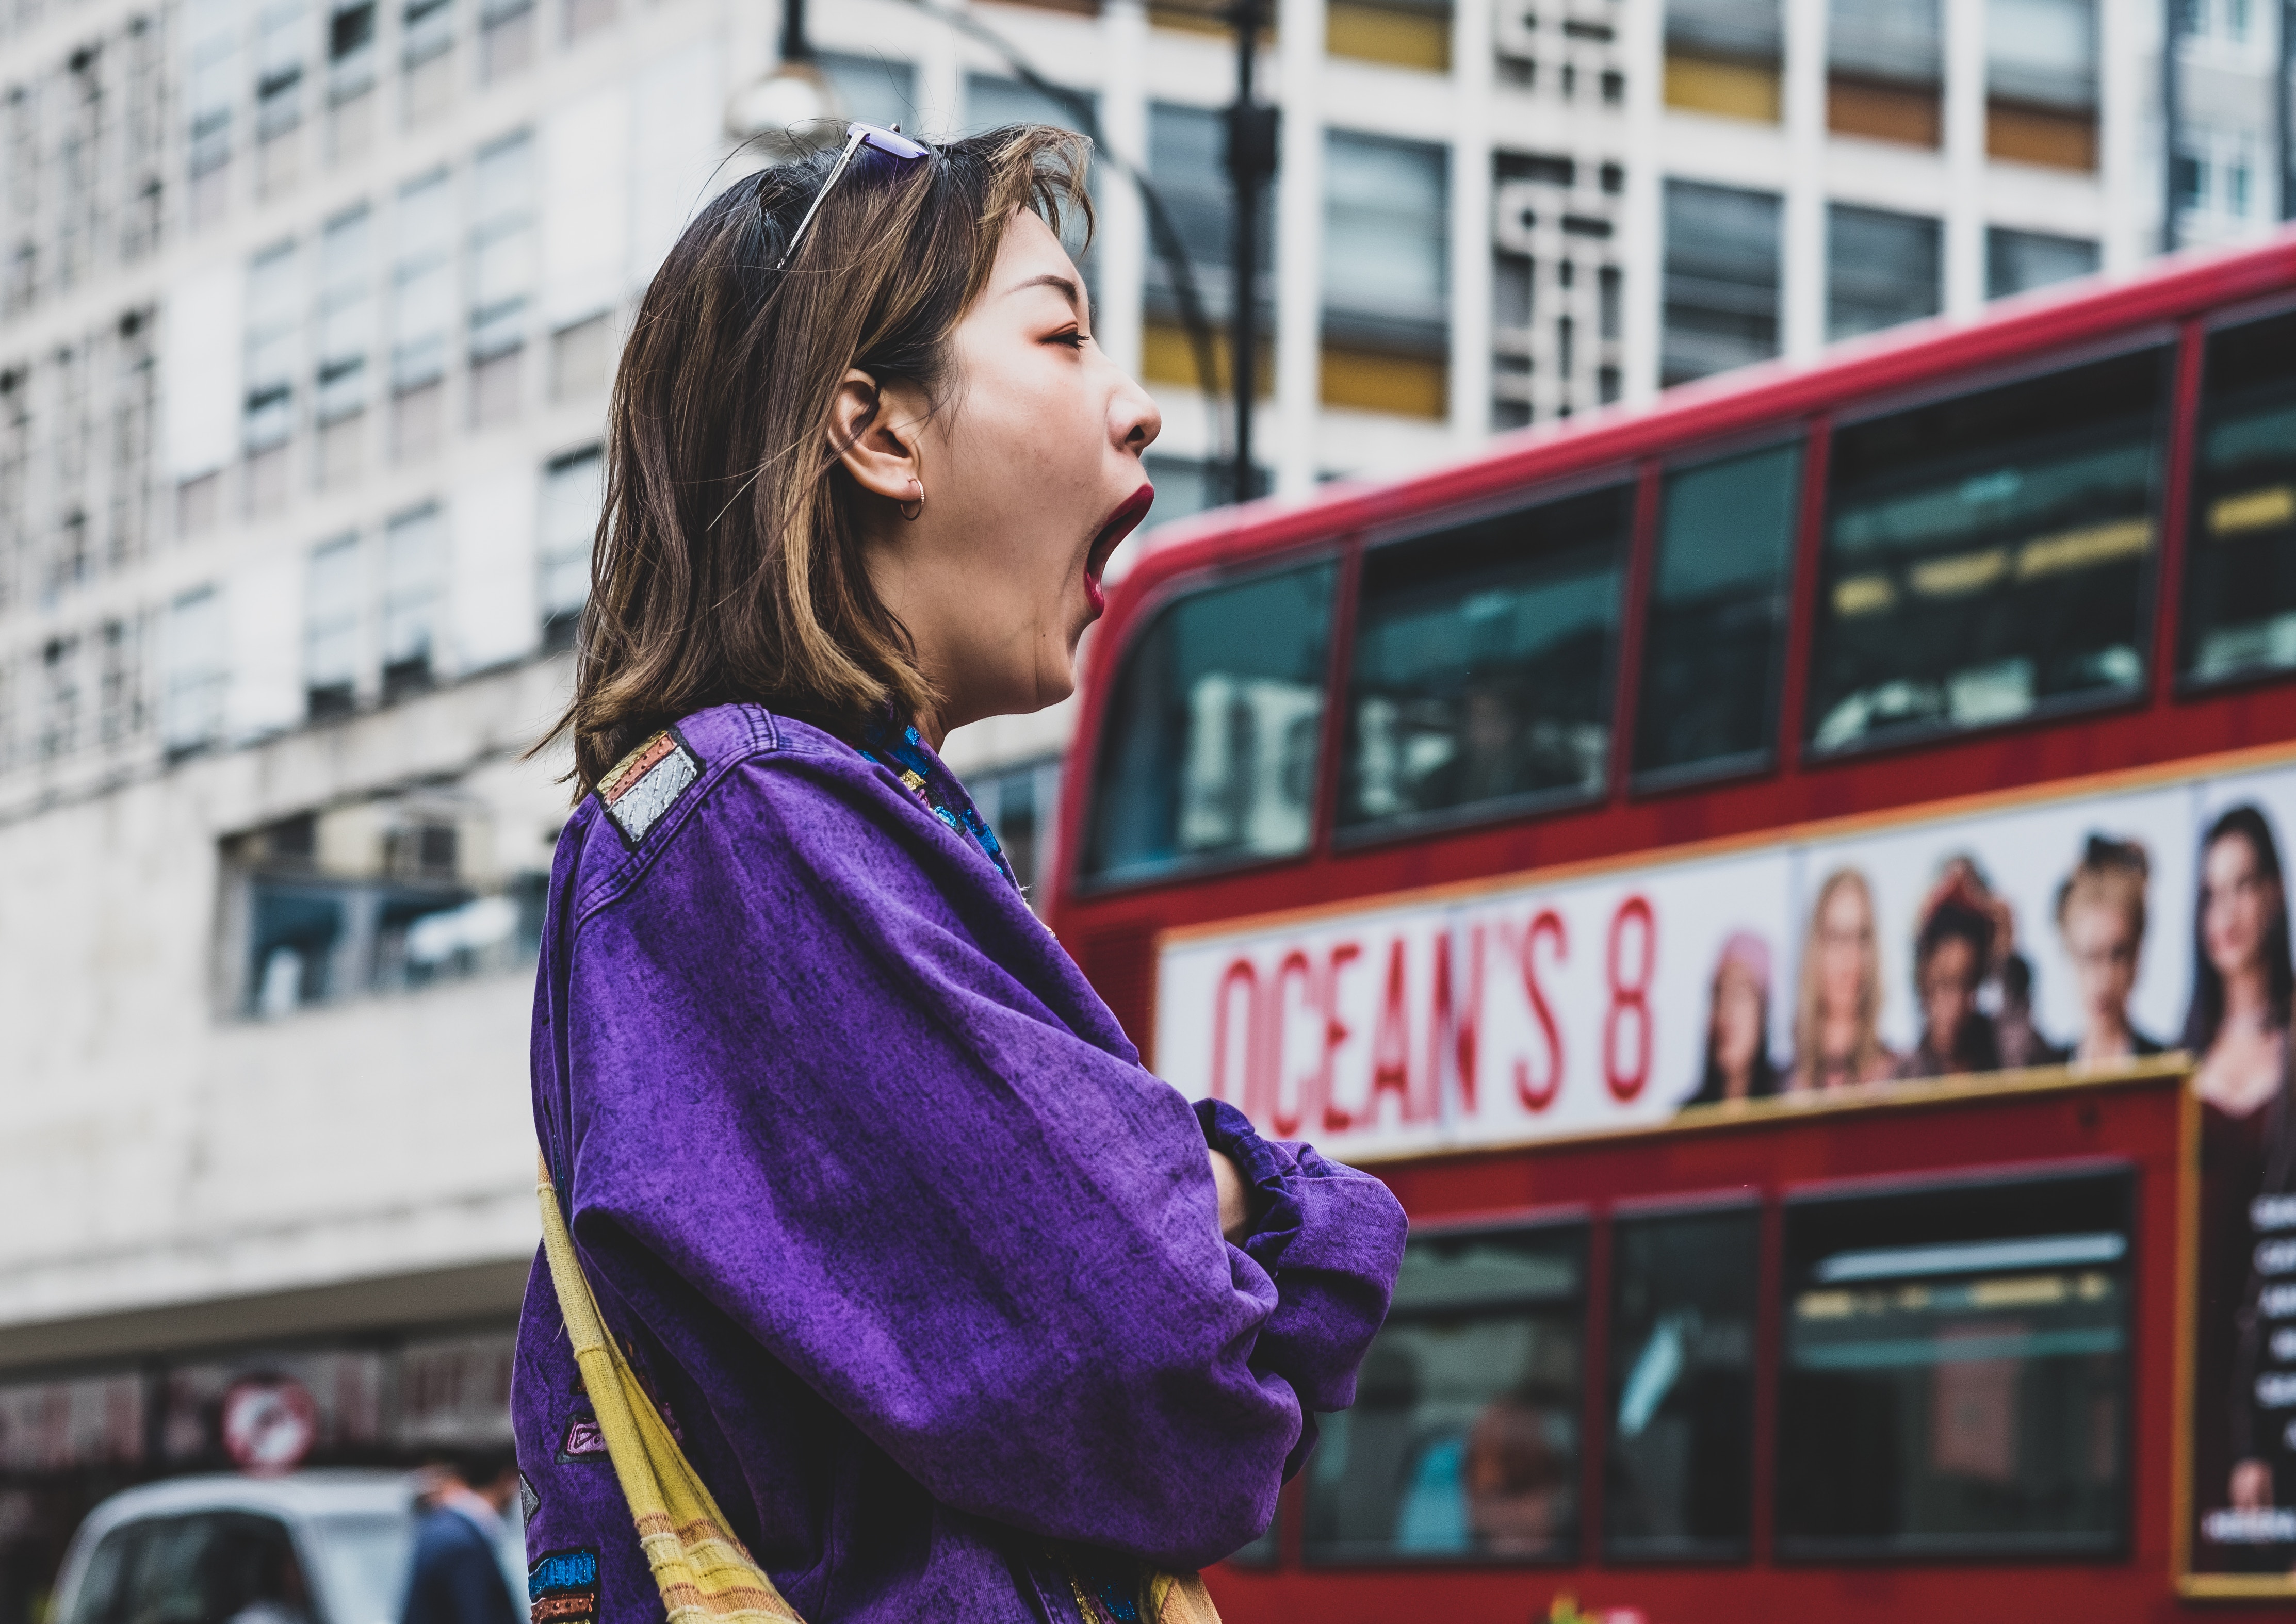 Image shows an Asian woman standing at a bus stop. She is yawning.